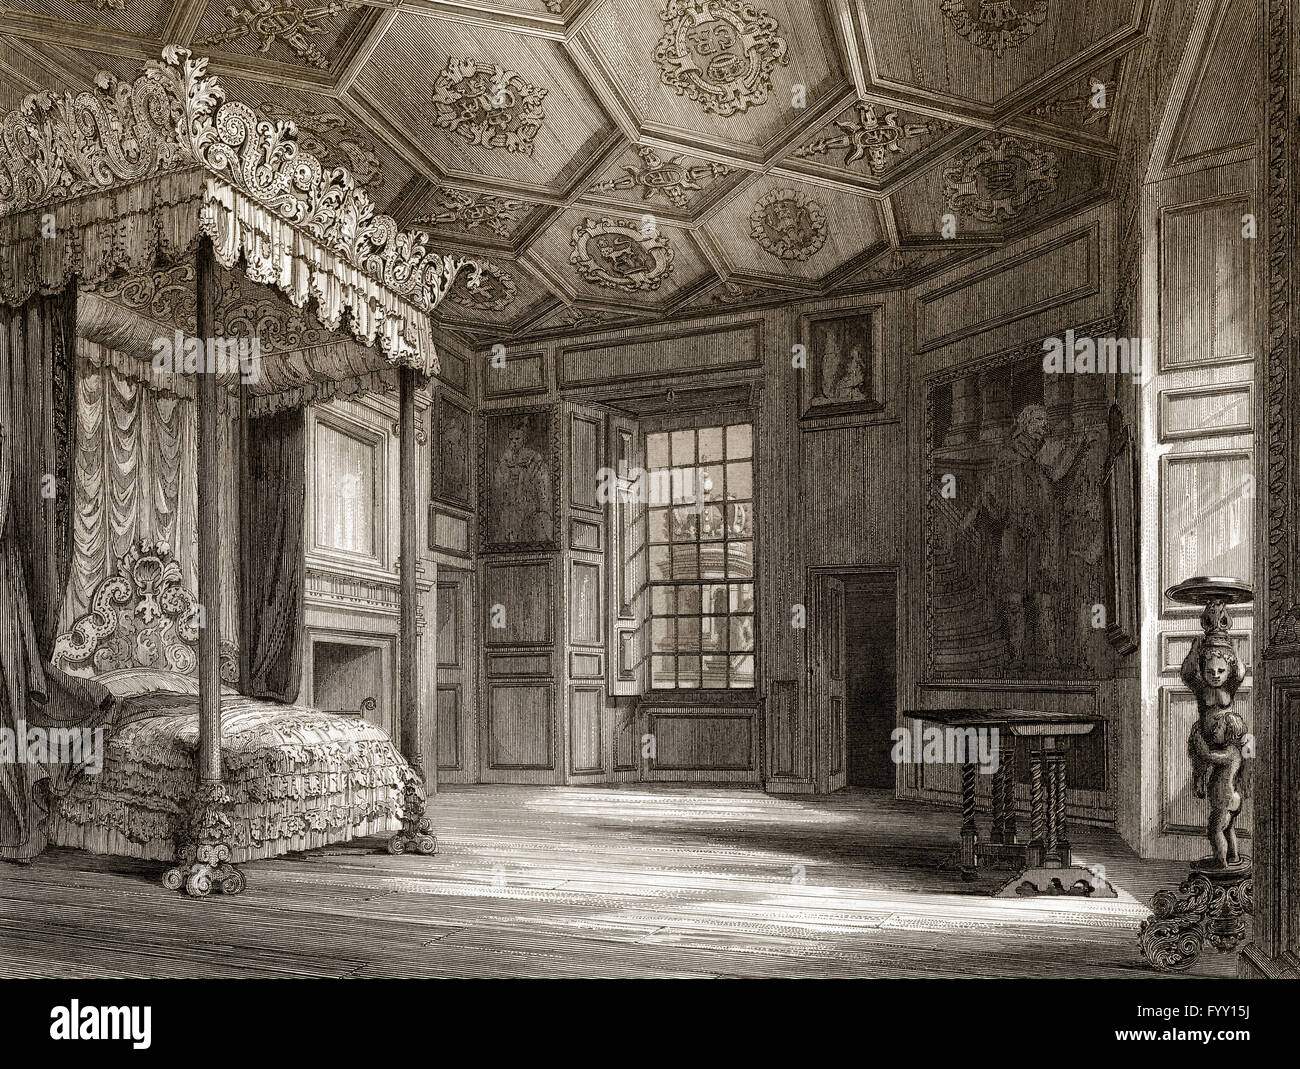 The Bedchamber of Mary, Queen of Scots, at Palace of Holyroodhouse, Edinburgh, Scotland Stock Photo